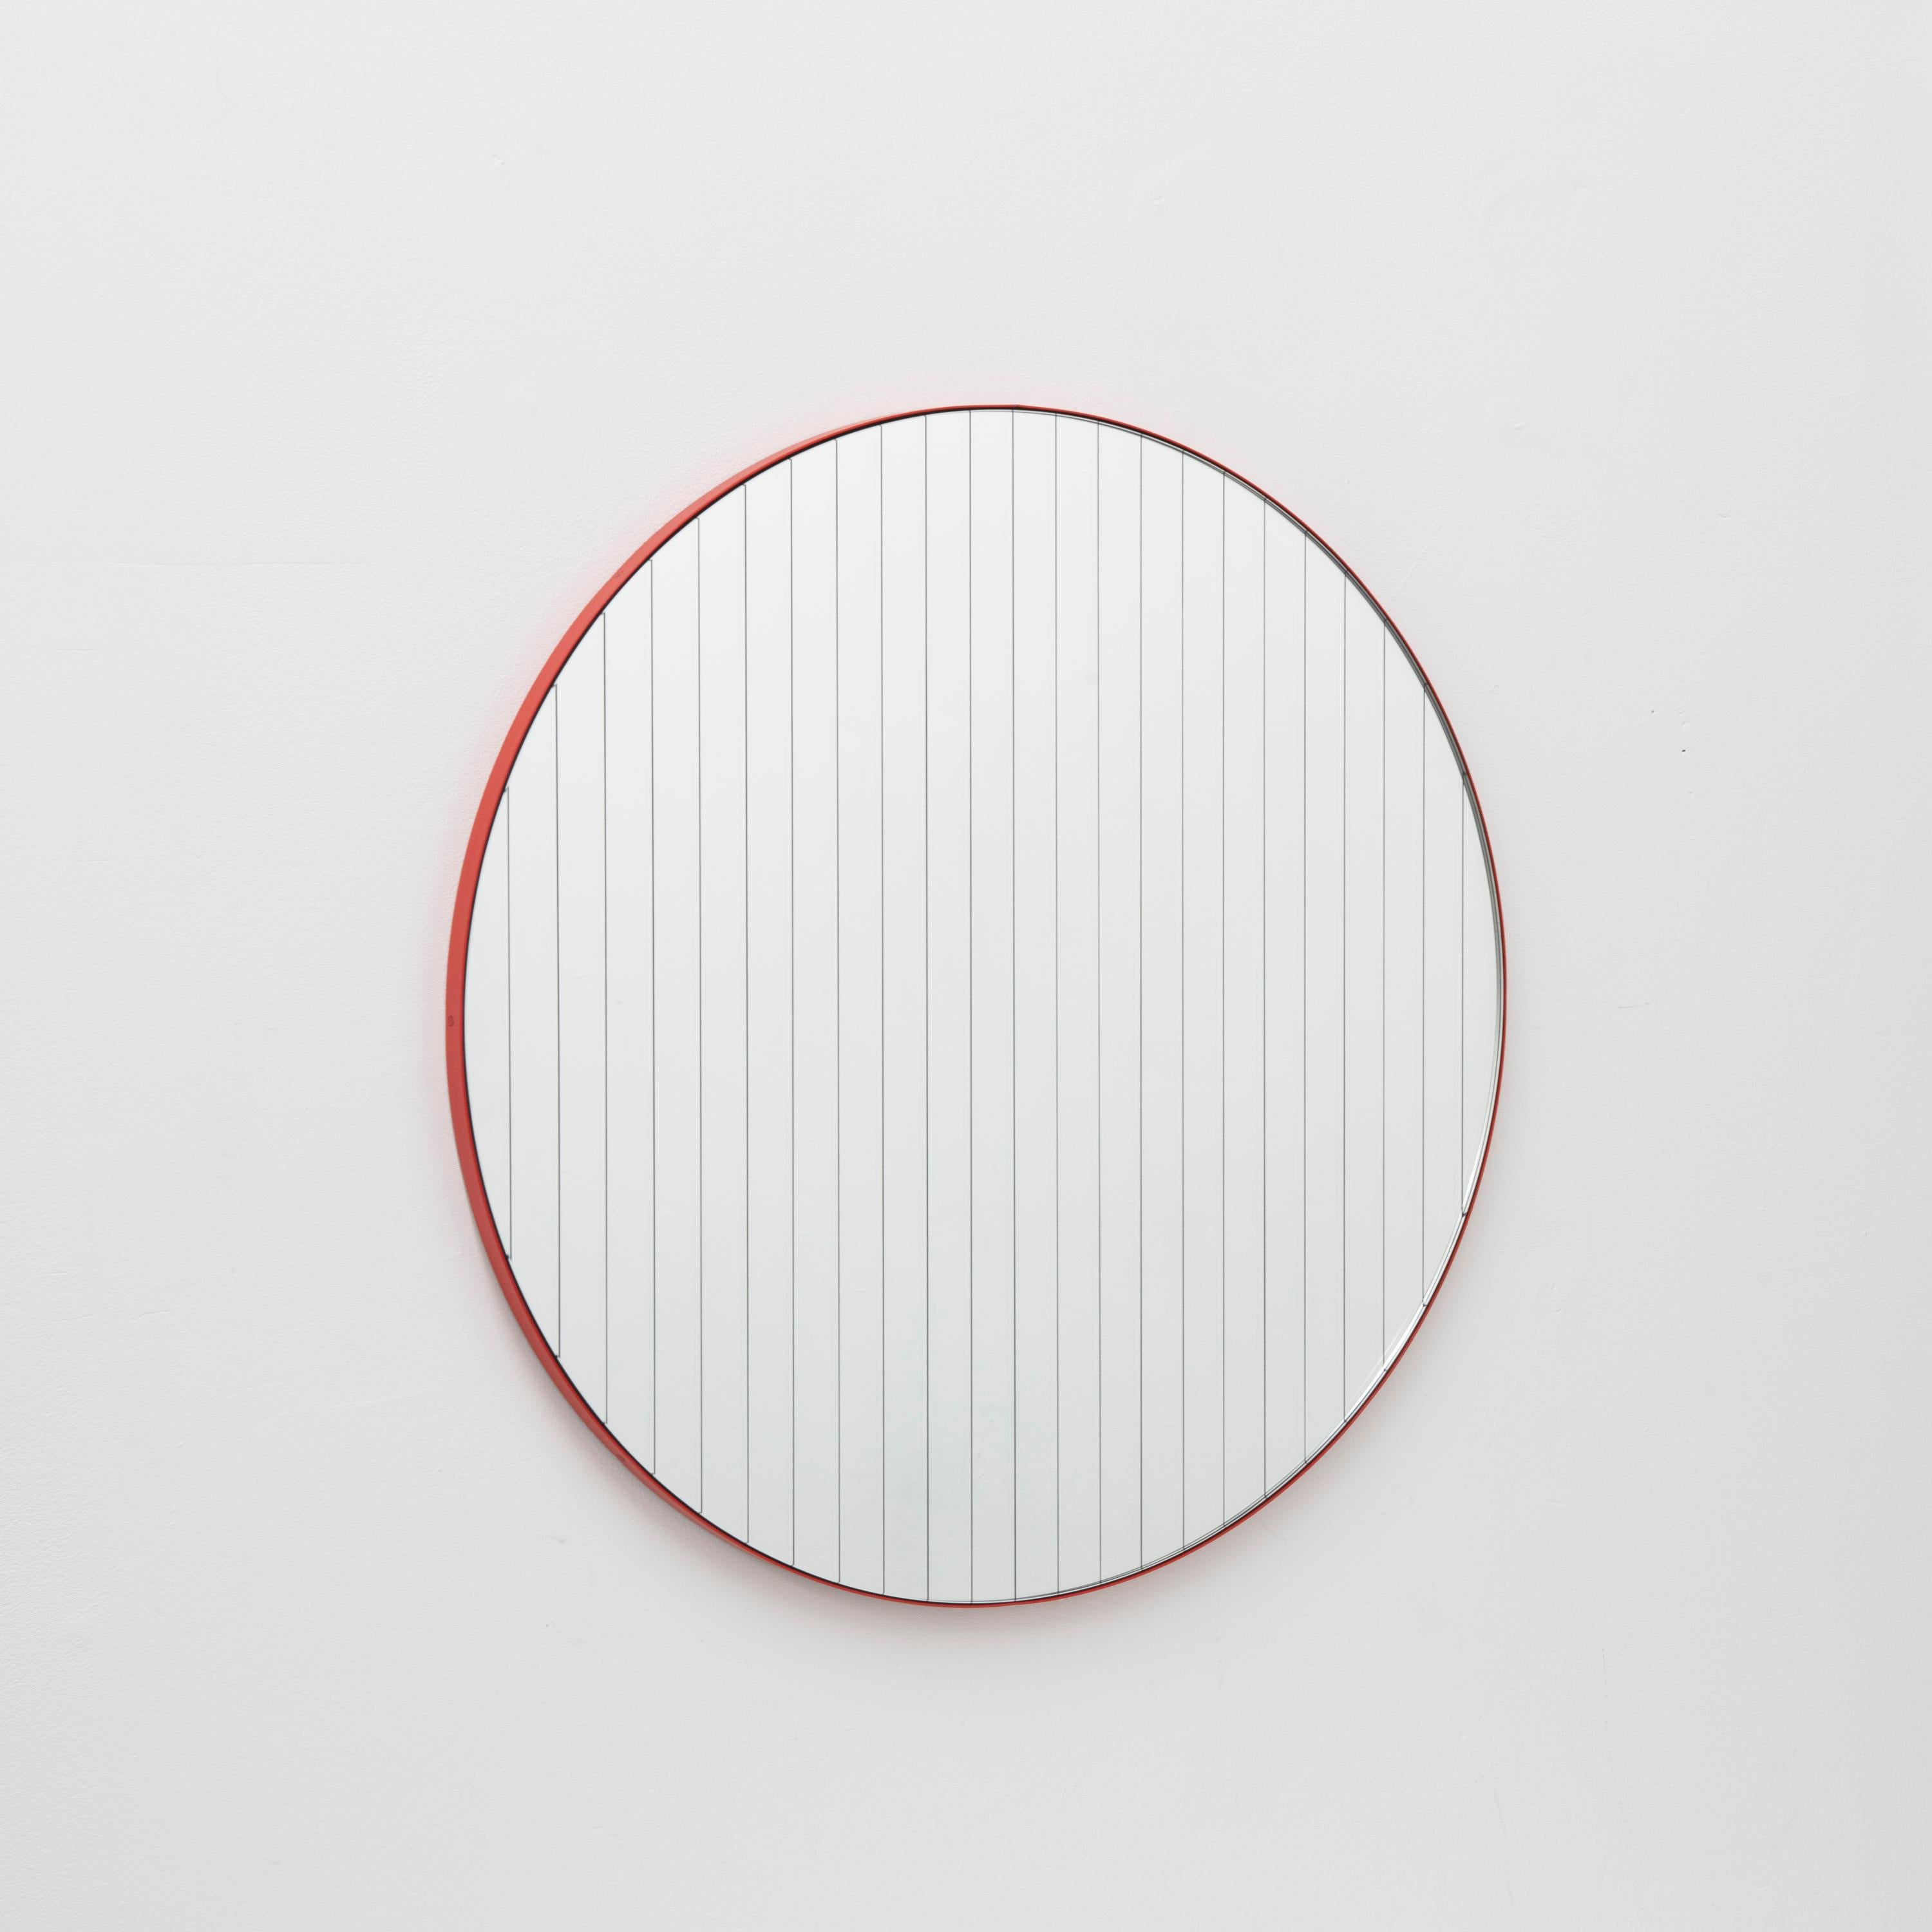 New Orbis Linus™ round mirror with elegant etched strips and a modern red frame. Designed and handcrafted in London, UK.

Fitted with a brass hook or an aluminium z-bar (depending on the size of the mirror), that allow for the hanging of the